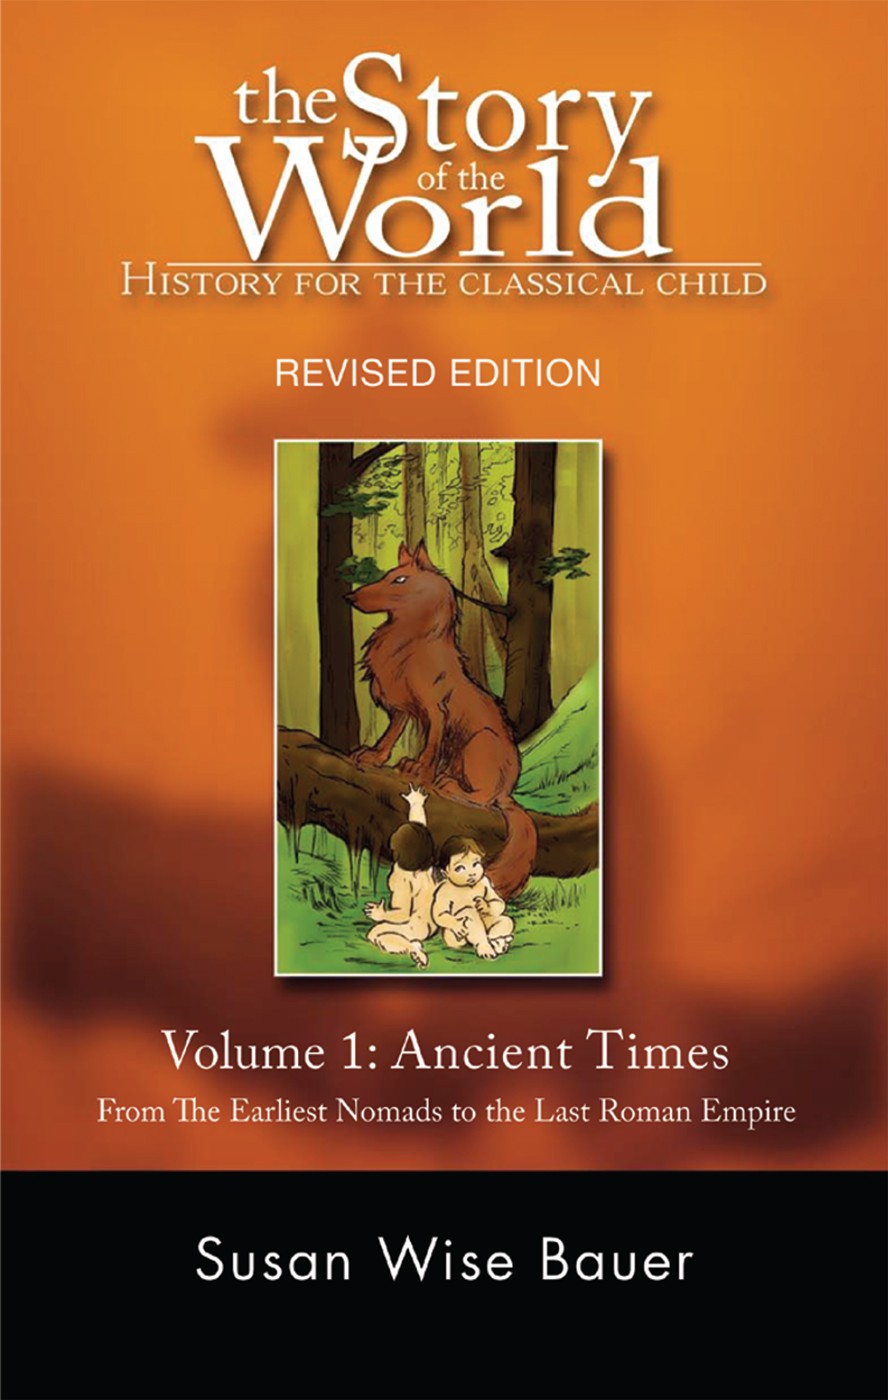 The Story of the World - Volume 1: Ancient Times (Revised)